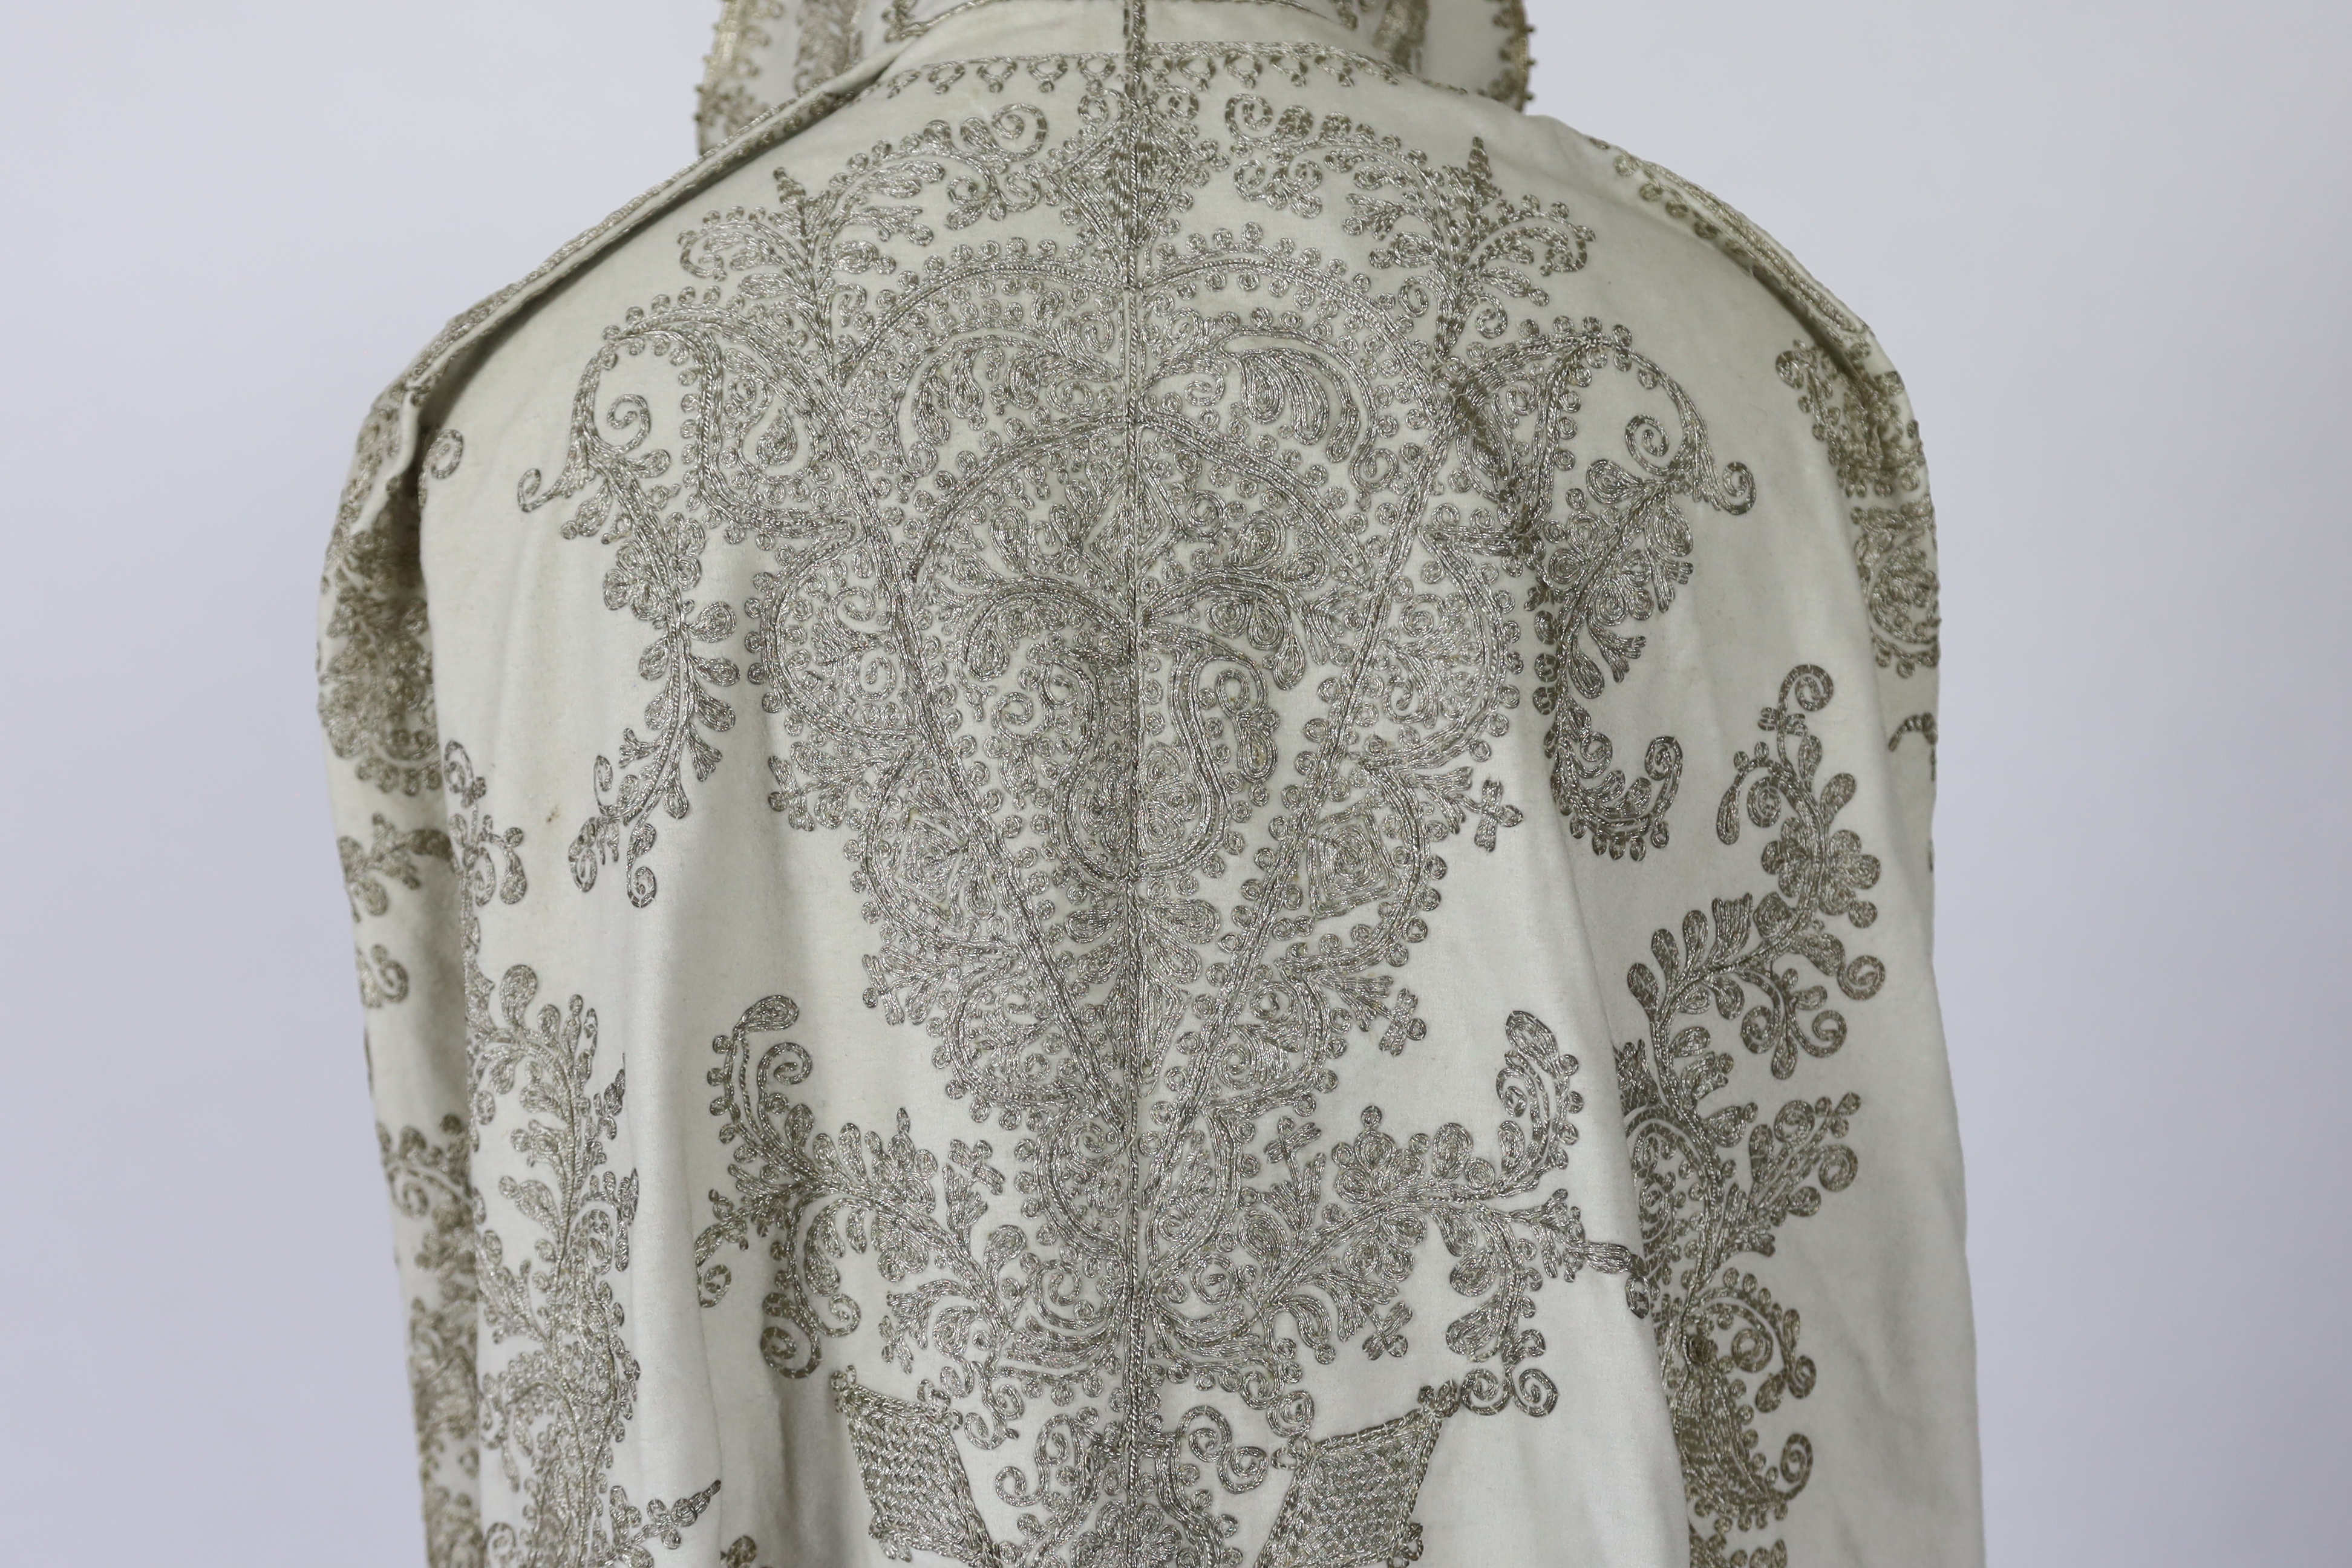 A 19th century Indian fine cream wool embroidered cape, probably made for the European market, embroidered in panels of silver metallic thread in an ornate vertical design with turquoise embellishments and lined in black